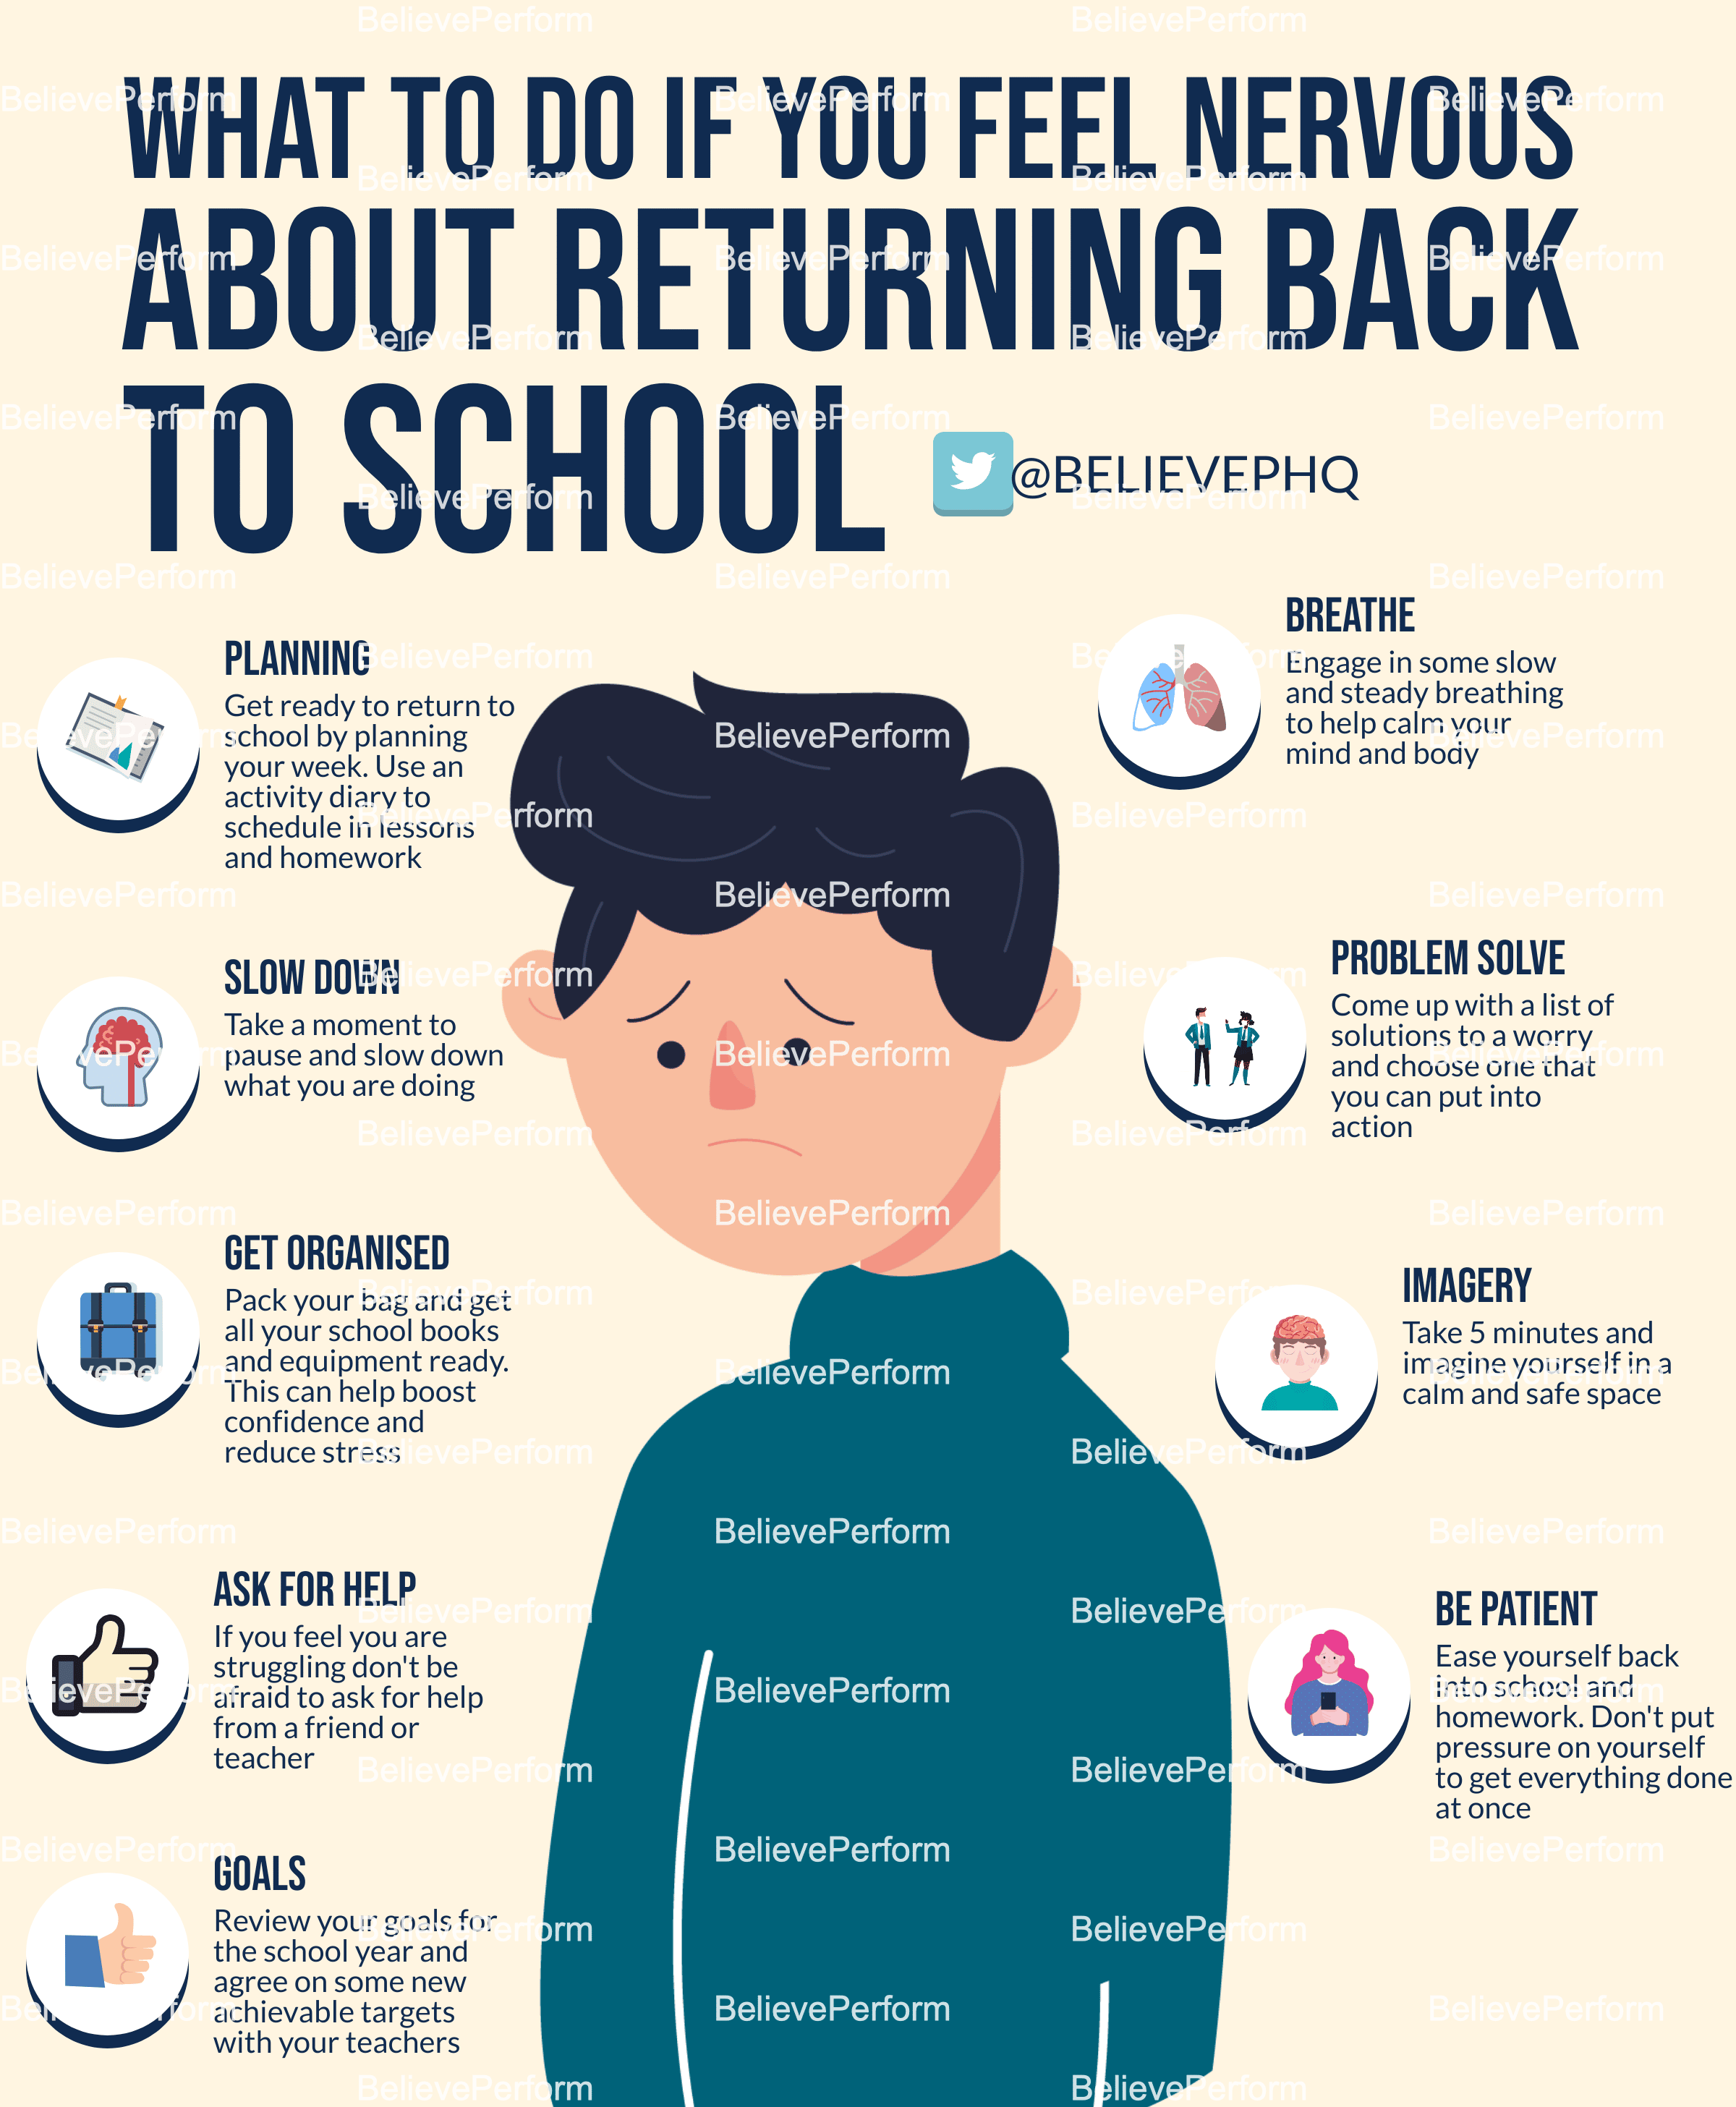 What to do if you feel nervous about returning back to school ...